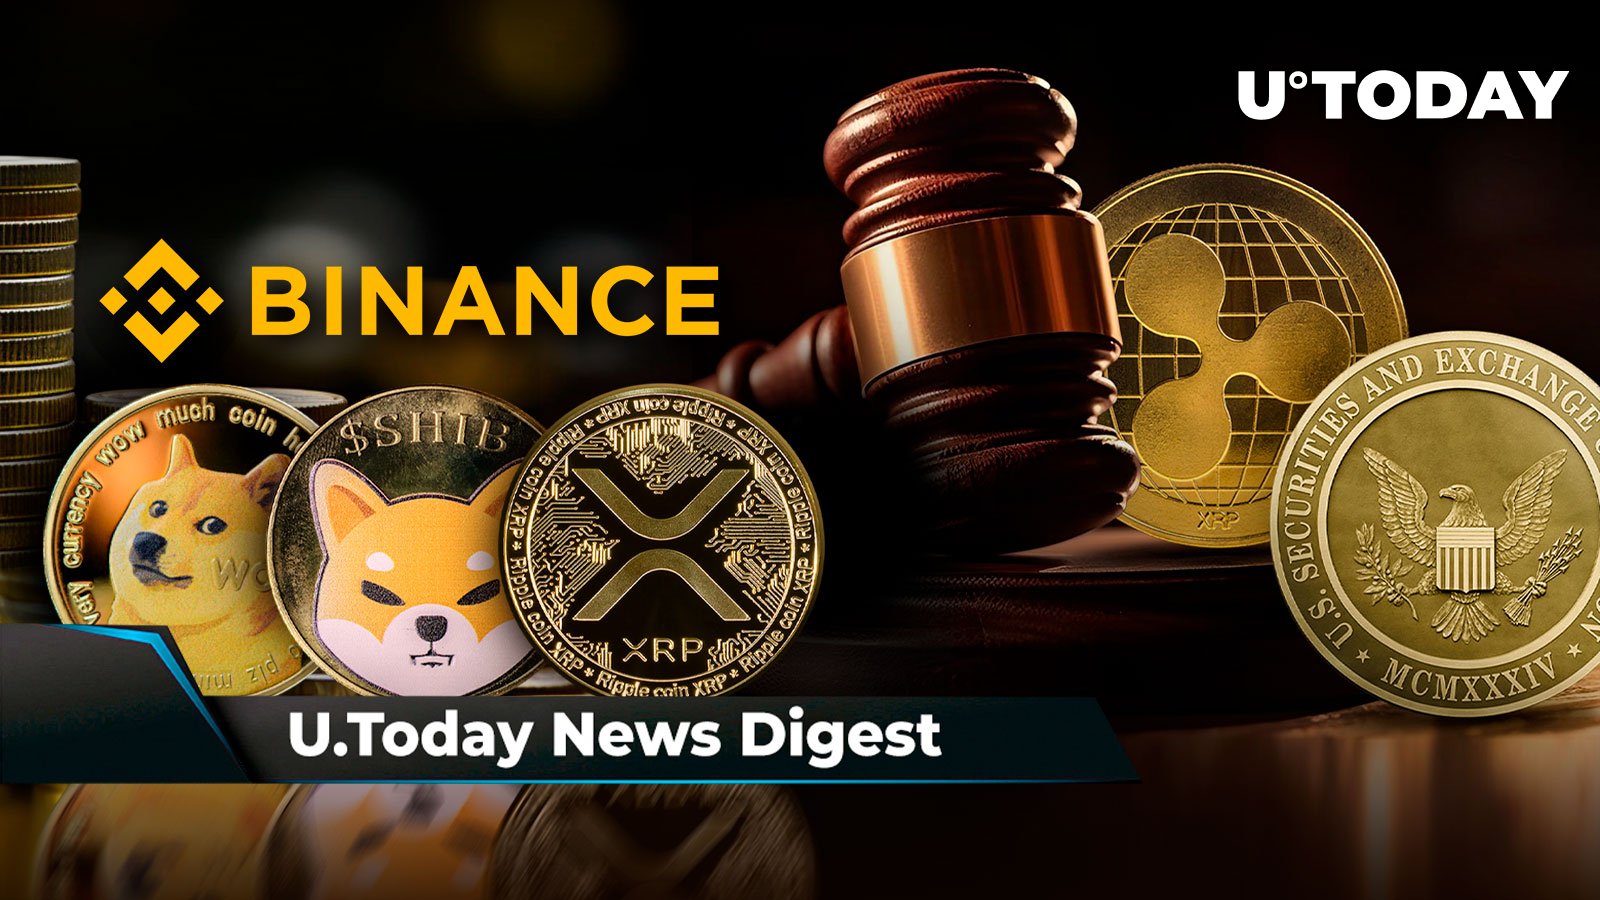 Binance DOGE, SHIB and XRP Reserves Top 100%, Ripple Files Crucial Request in SEC Lawsuit, Bitcoin Wallet Activity Dips Despite ETF Approvals: Crypto News Digest by U.Today